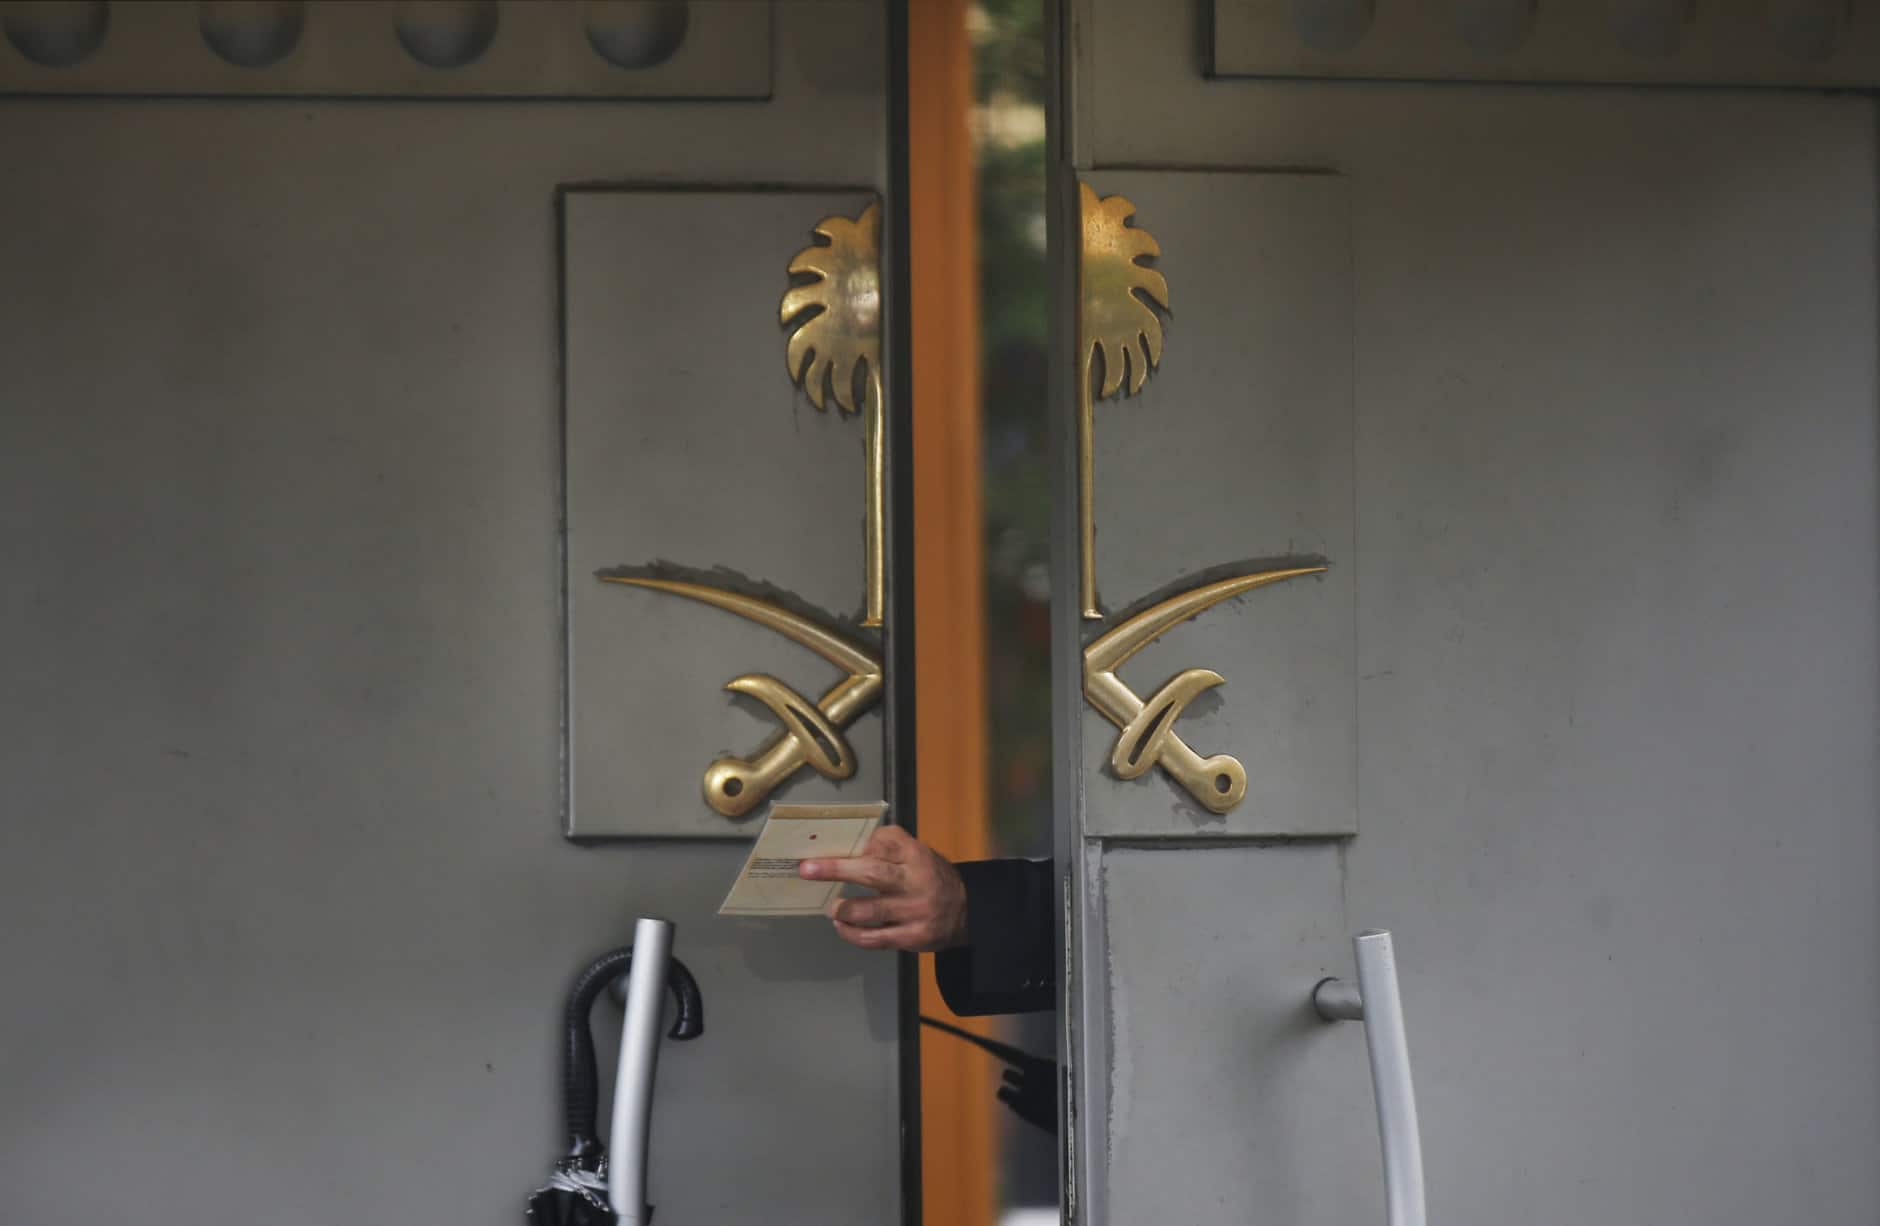 A security guard passes a document to a colleague outside Saudi Arabia's Consulate in Istanbul on Oct. 15, 2018, nearly two weeks after Saudi journalist Jamal Khashoggi was killed at the consulate. (AP Photo/Petros Giannakouris)